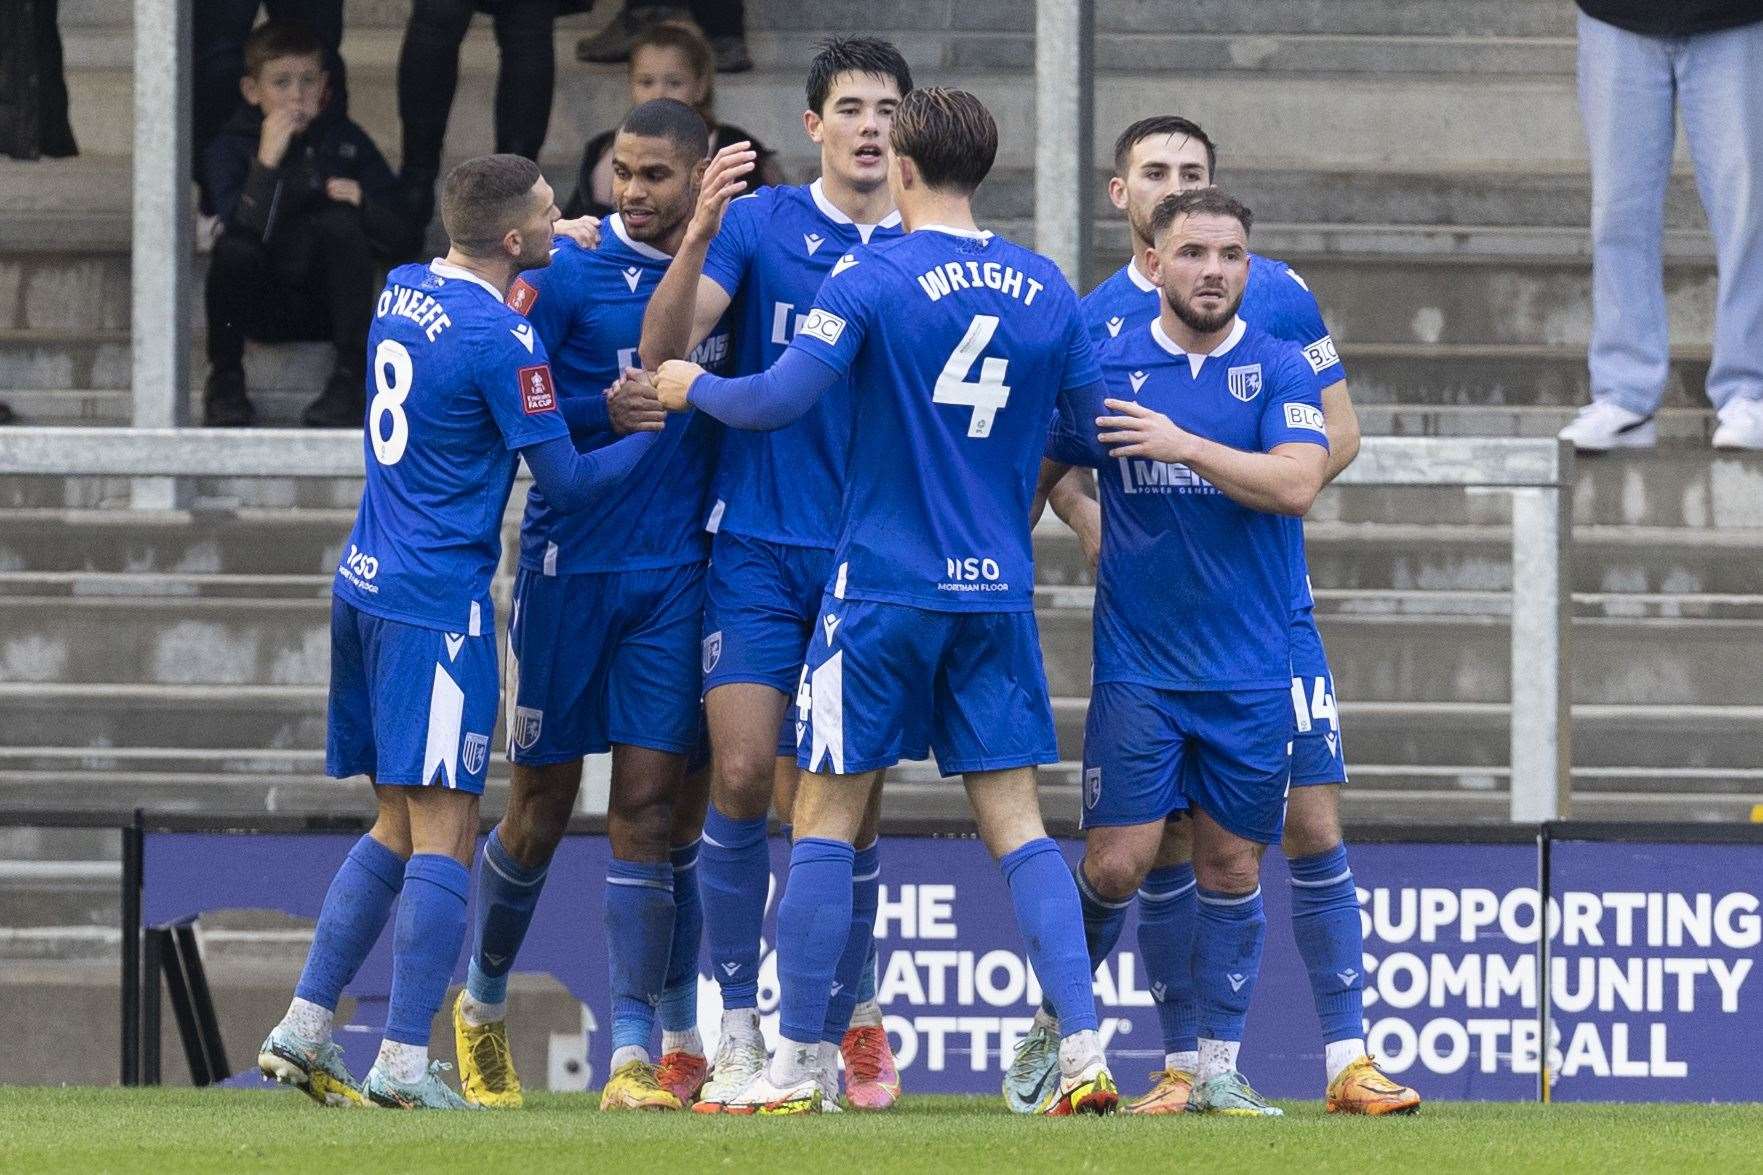 With 28 games played so far this season, the Gills boss admits it's been tough Picture: KPI